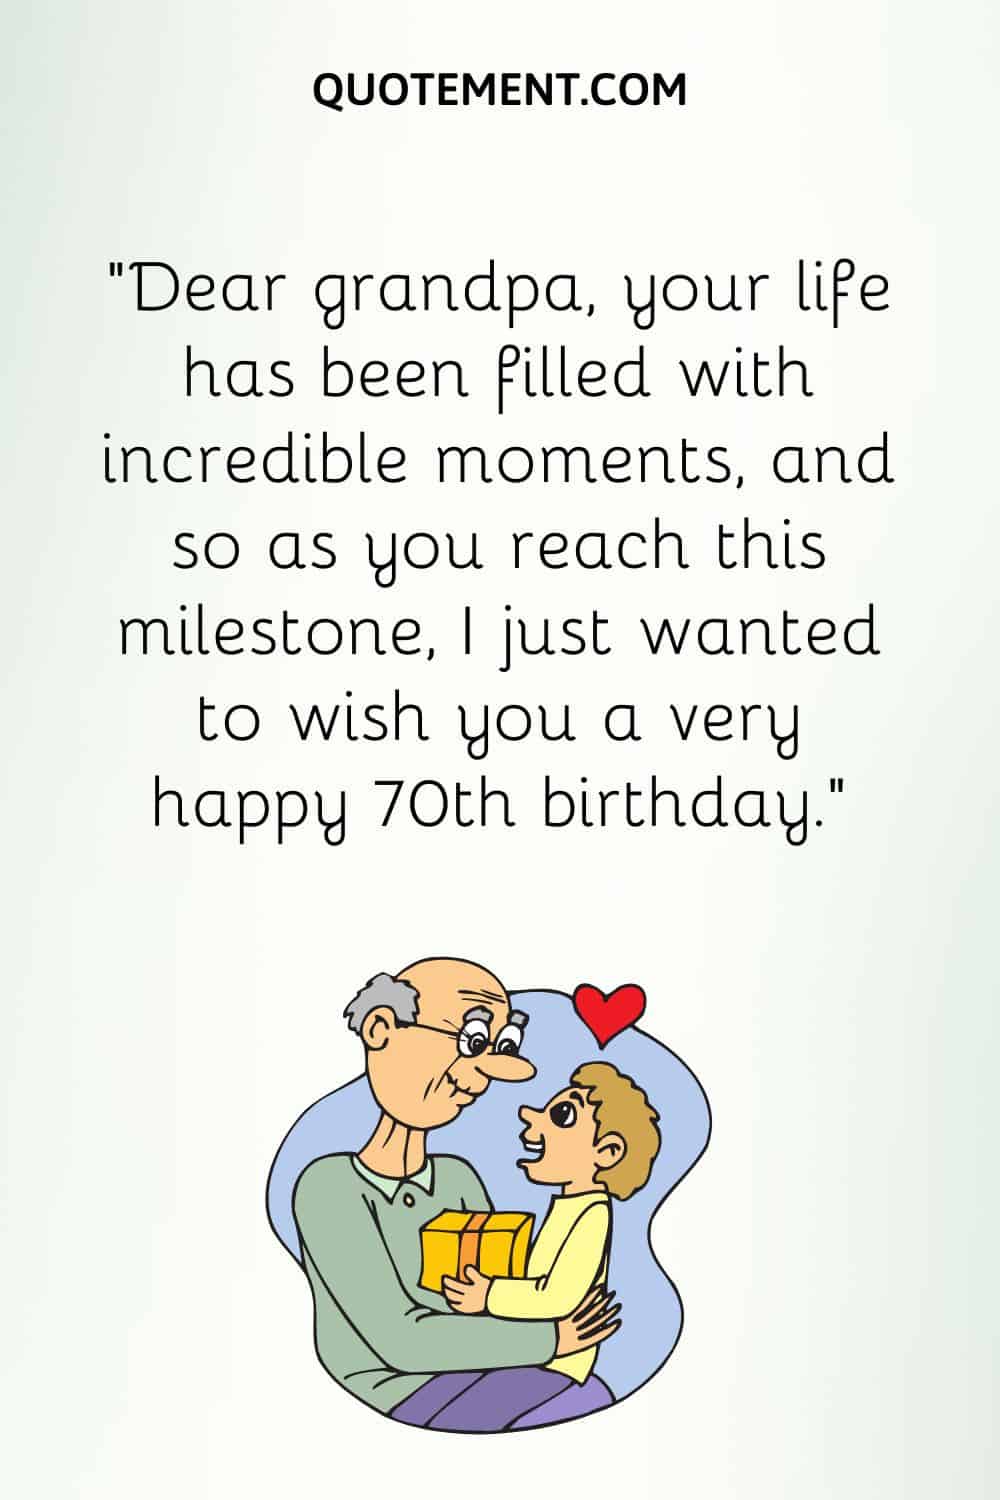 “Dear grandpa, your life has been filled with incredible moments, and so as you reach this milestone, I just wanted to wish you a very happy 70th birthday.”